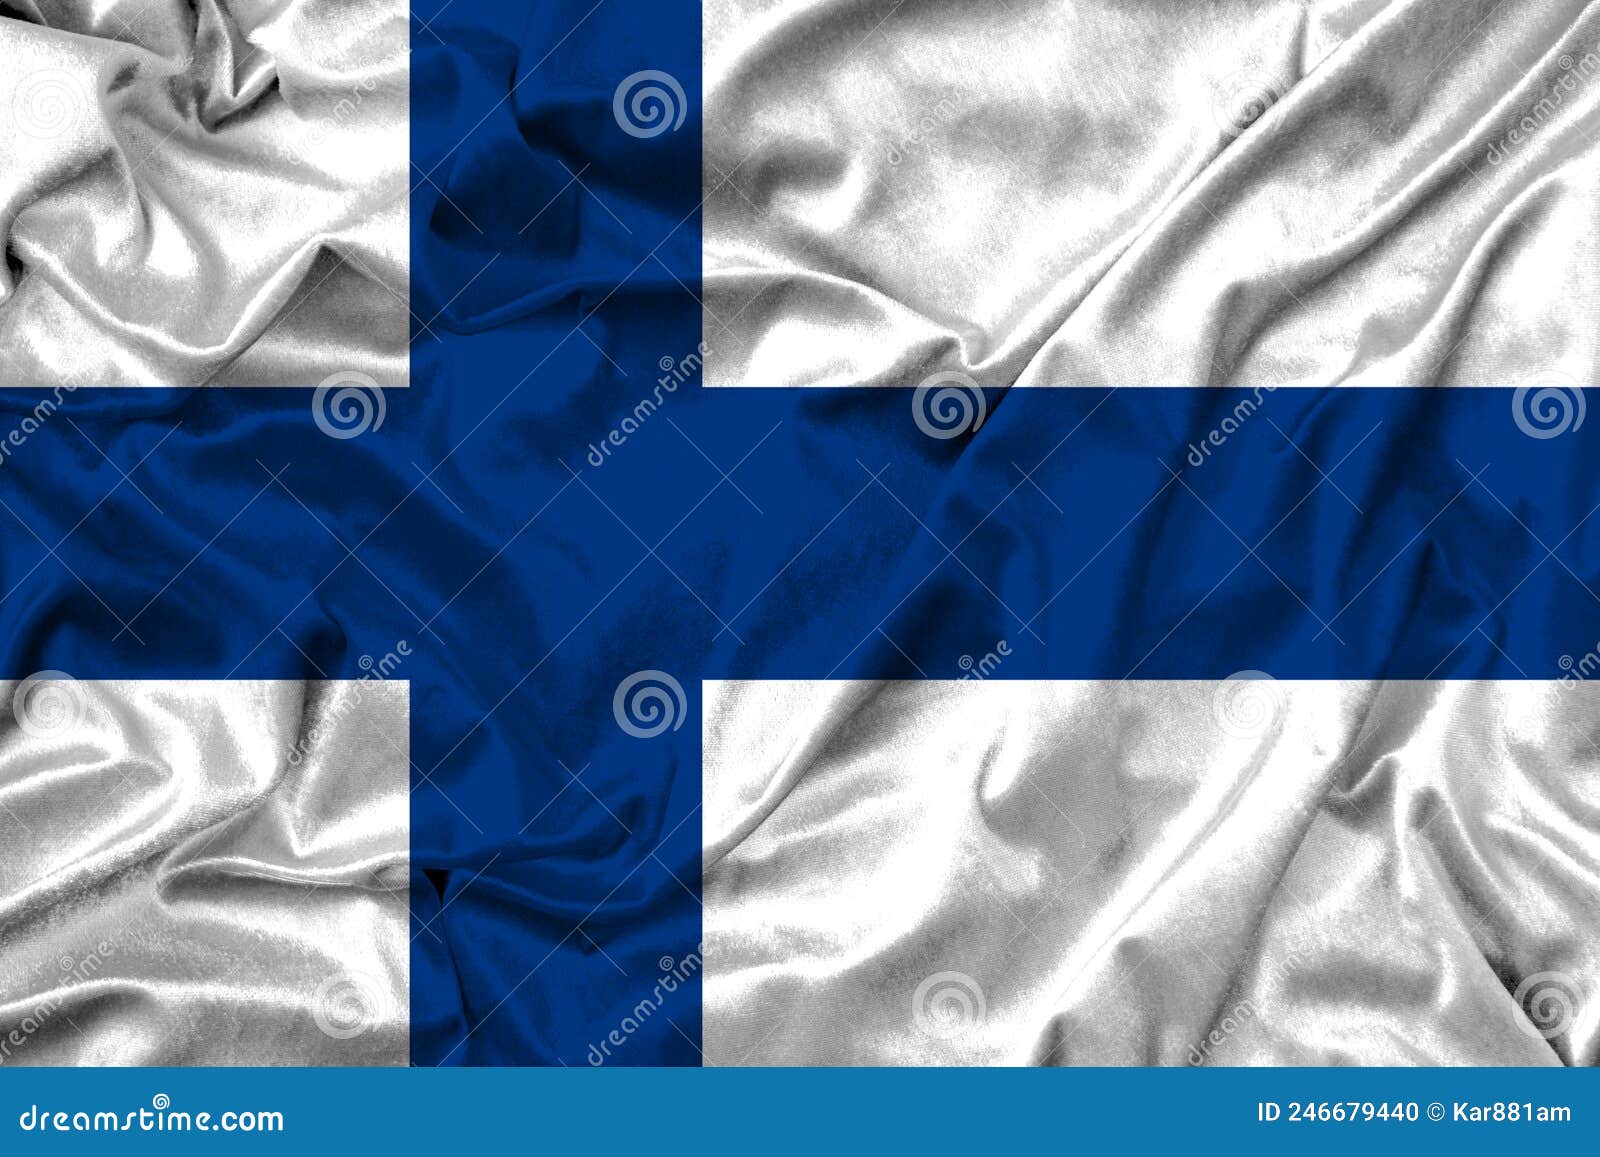 finlandia flag on fabric texture. 3d work and 3d image